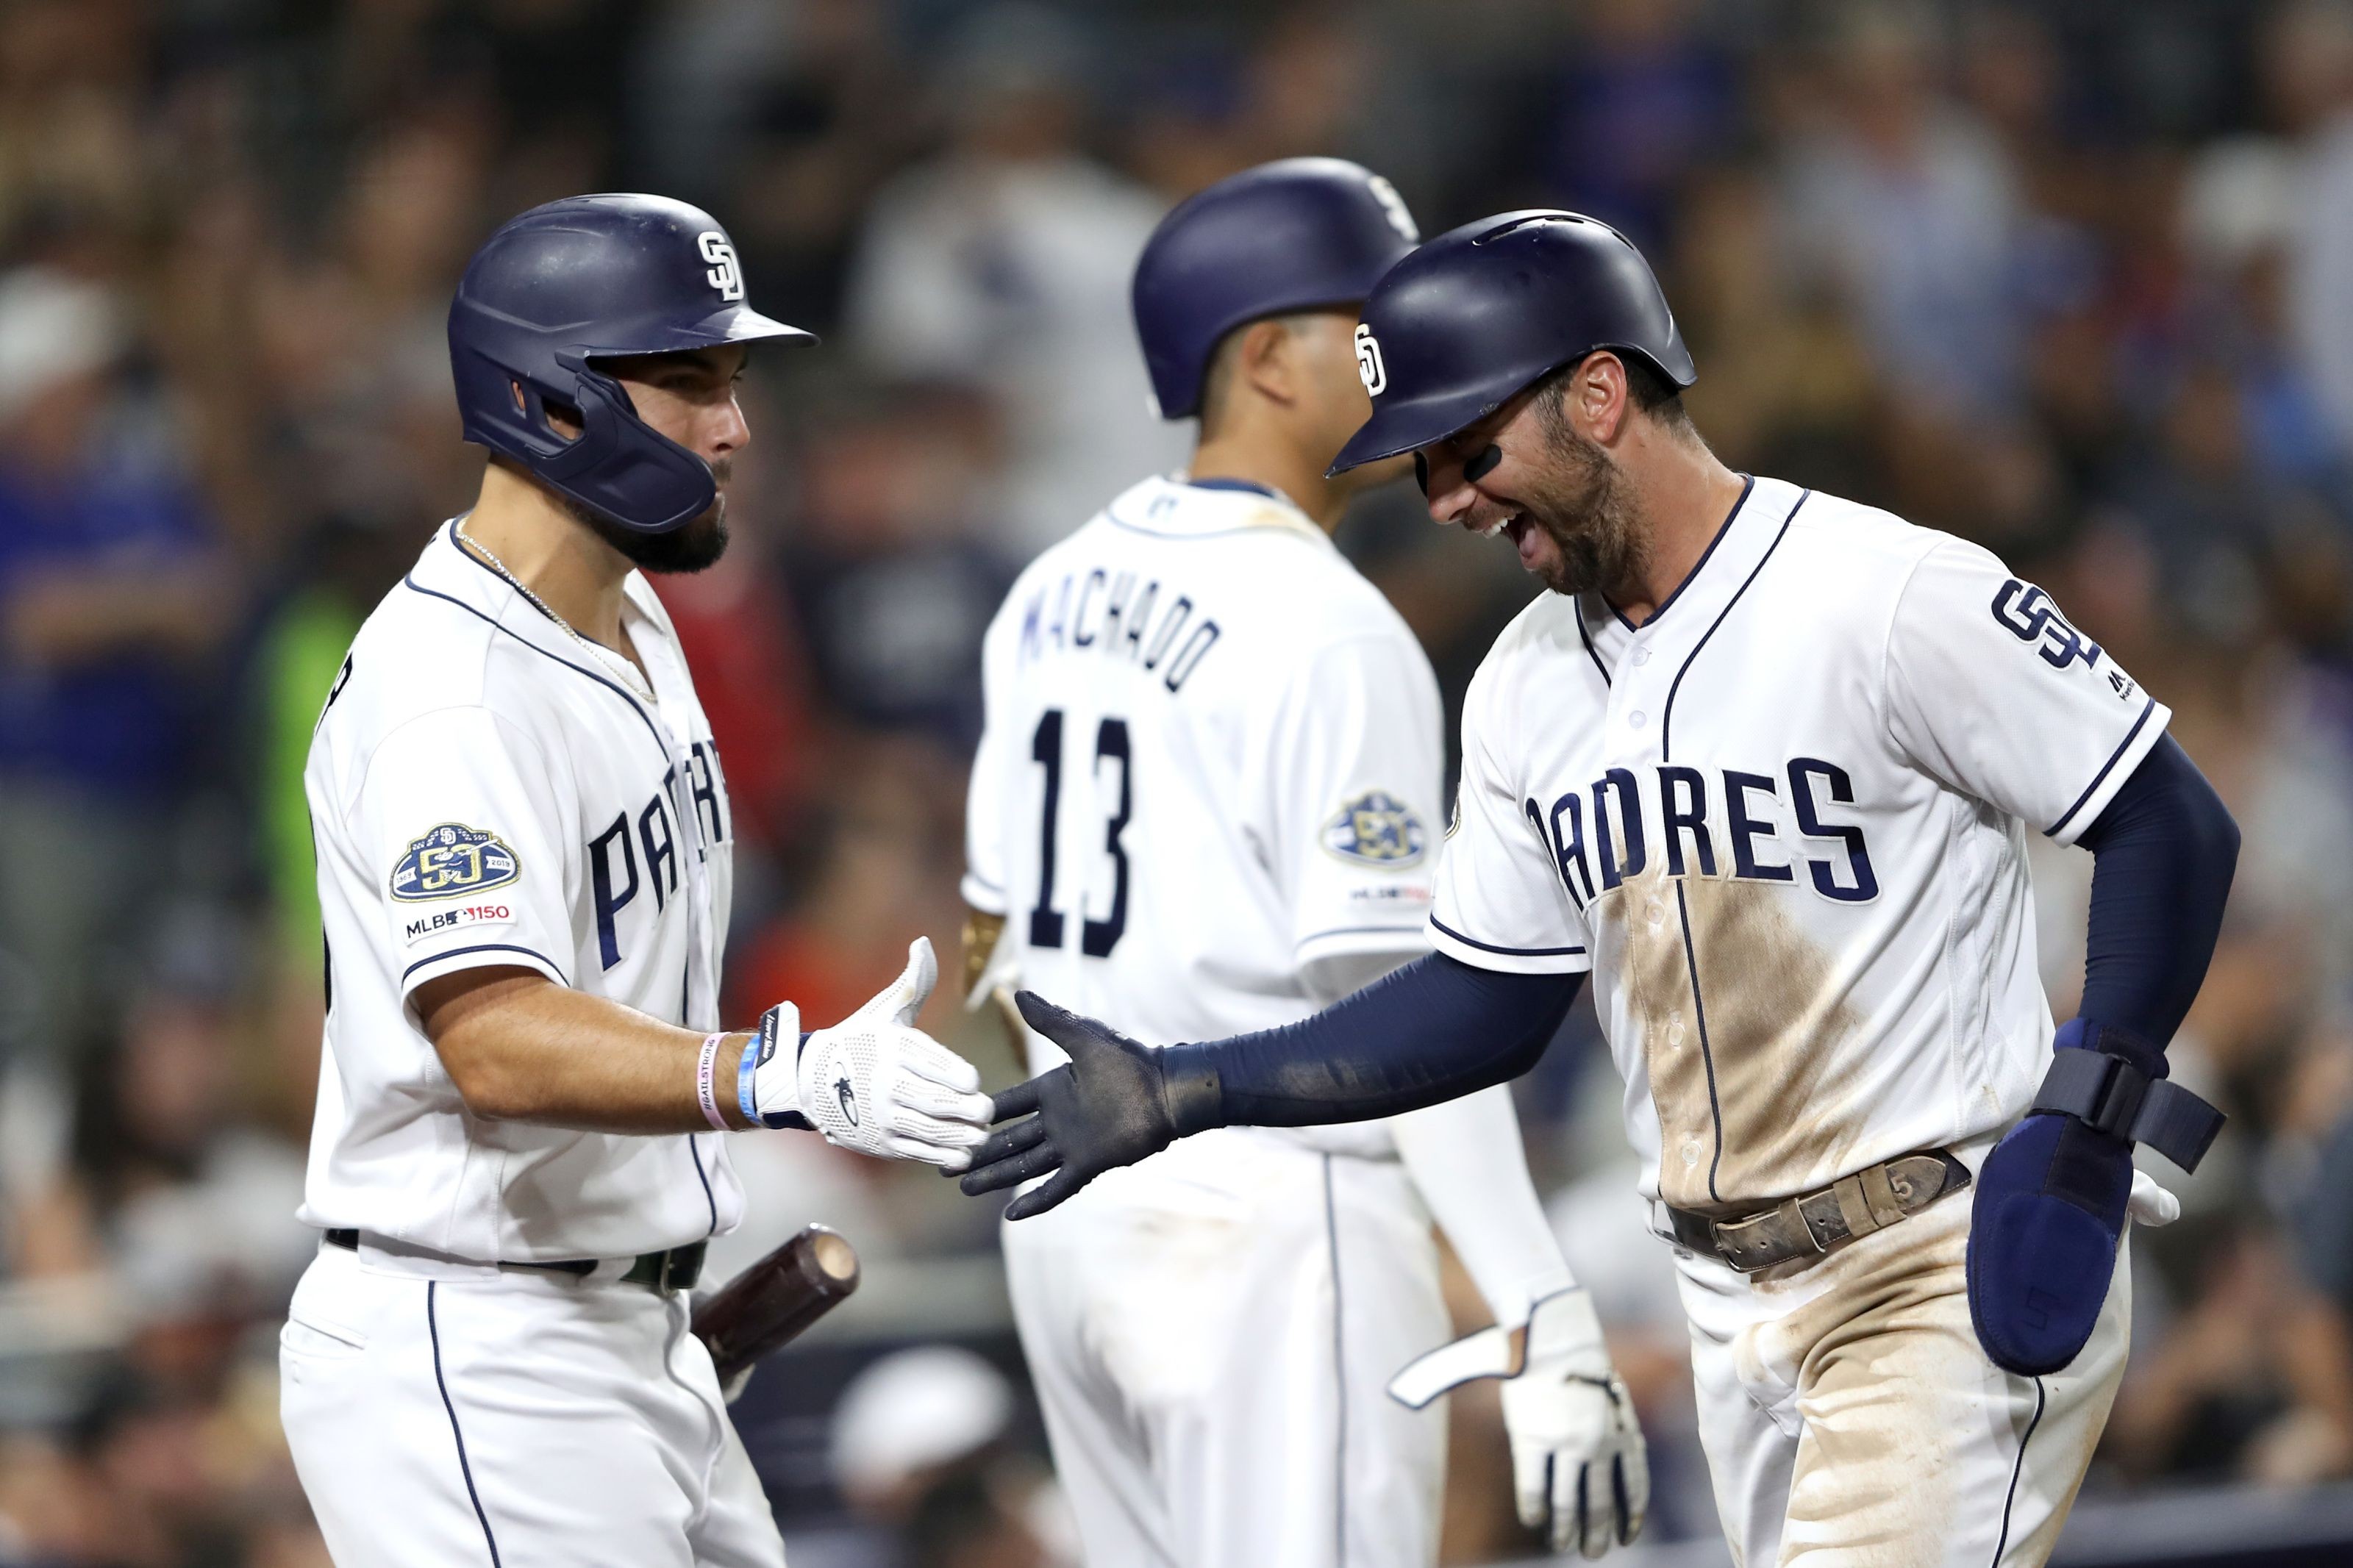 San Diego Padres open up roster spot after flurry of moves